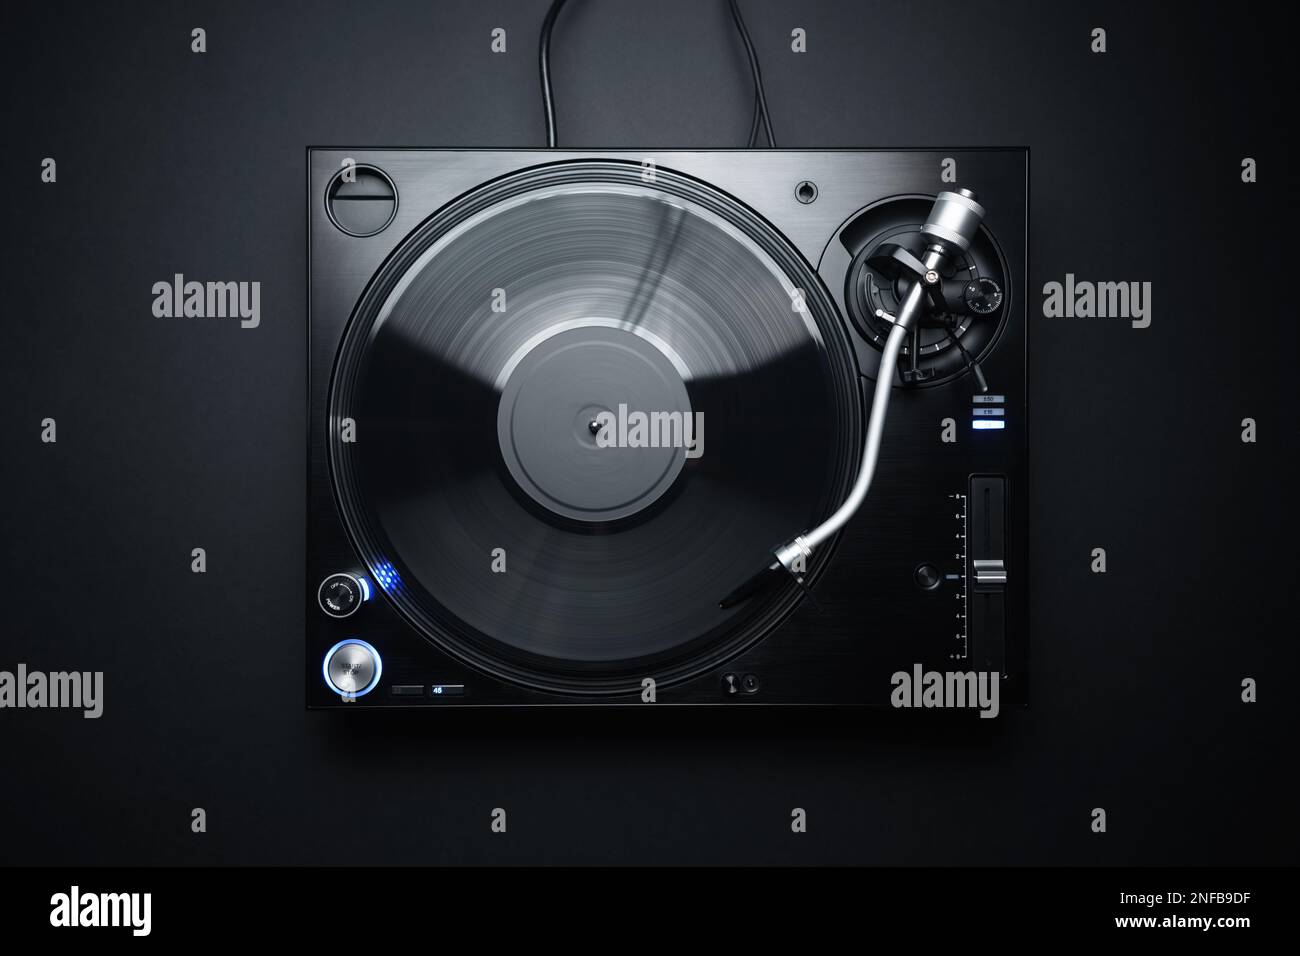 Flat lay photo of DJ turntable playing vinyl record on black background. Professional analog record player shot directly from above Stock Photo